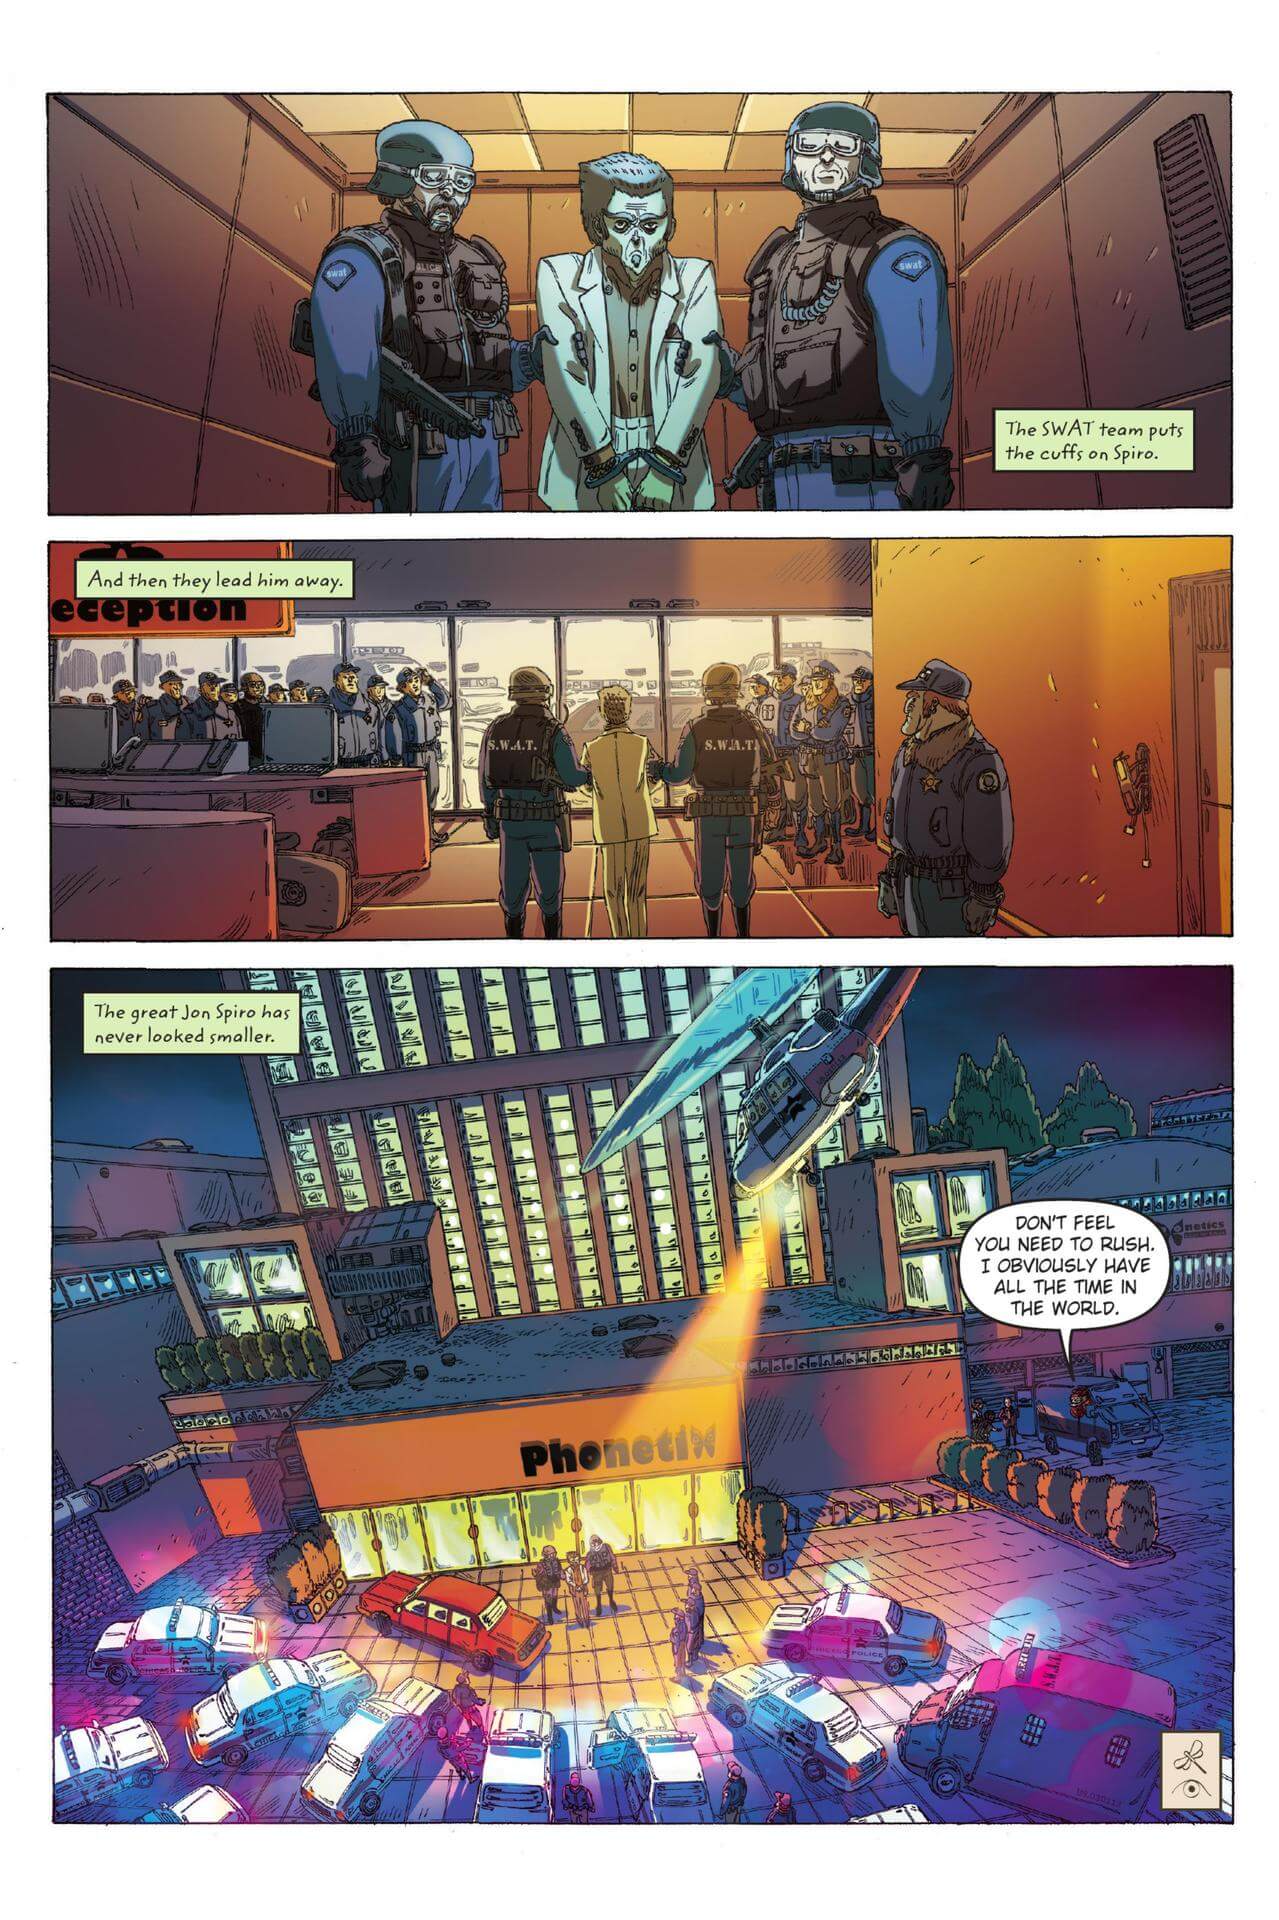 page 100 of artemis fowl eternity code graphic novel